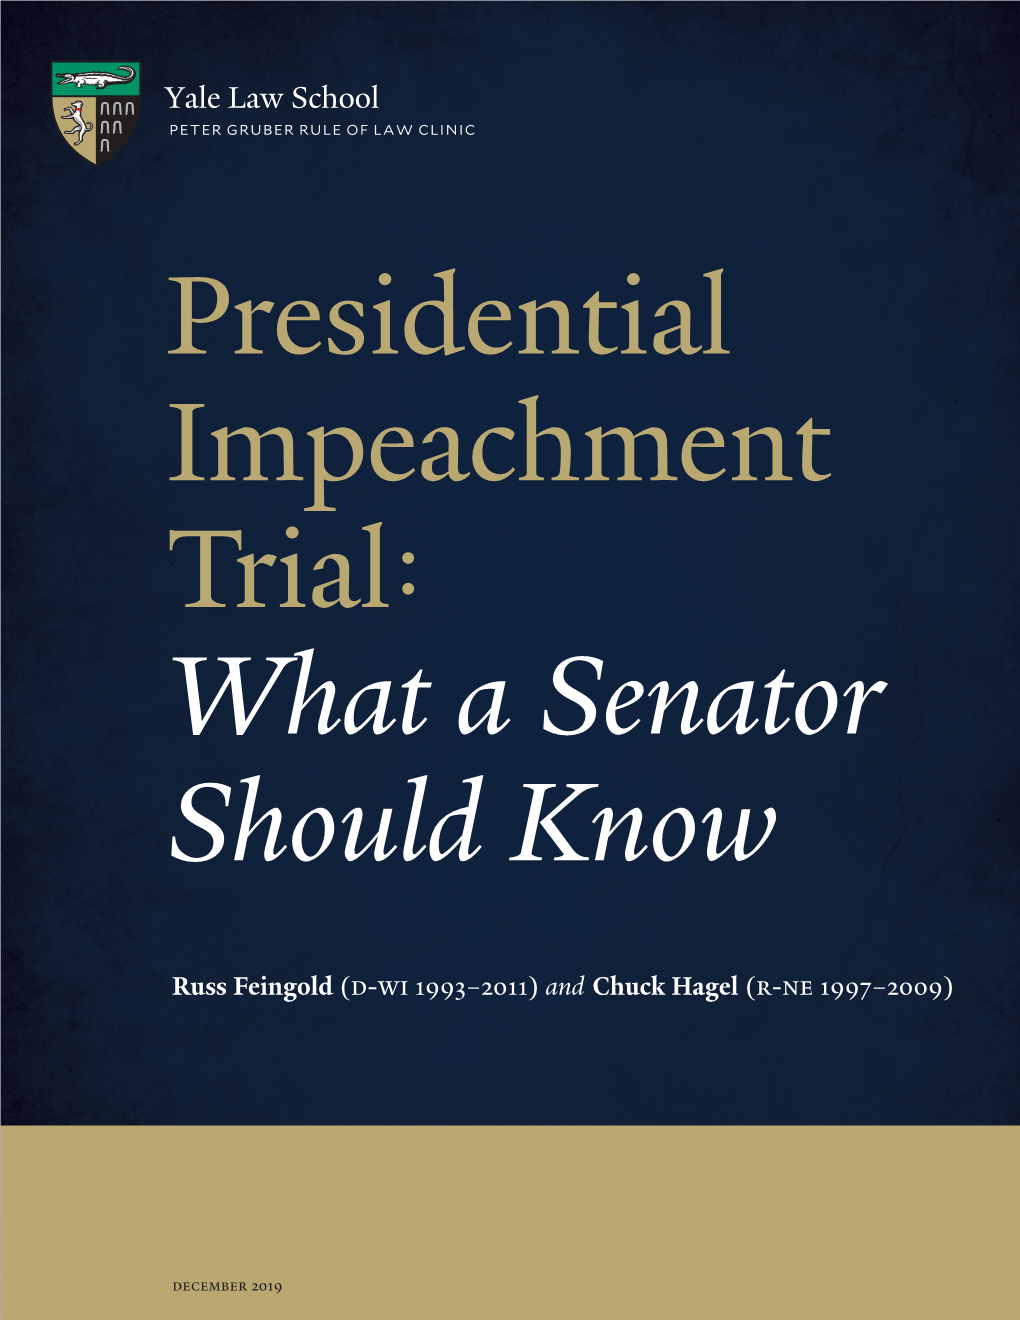 Presidential Impeachment Trial: What a Senator Should Know